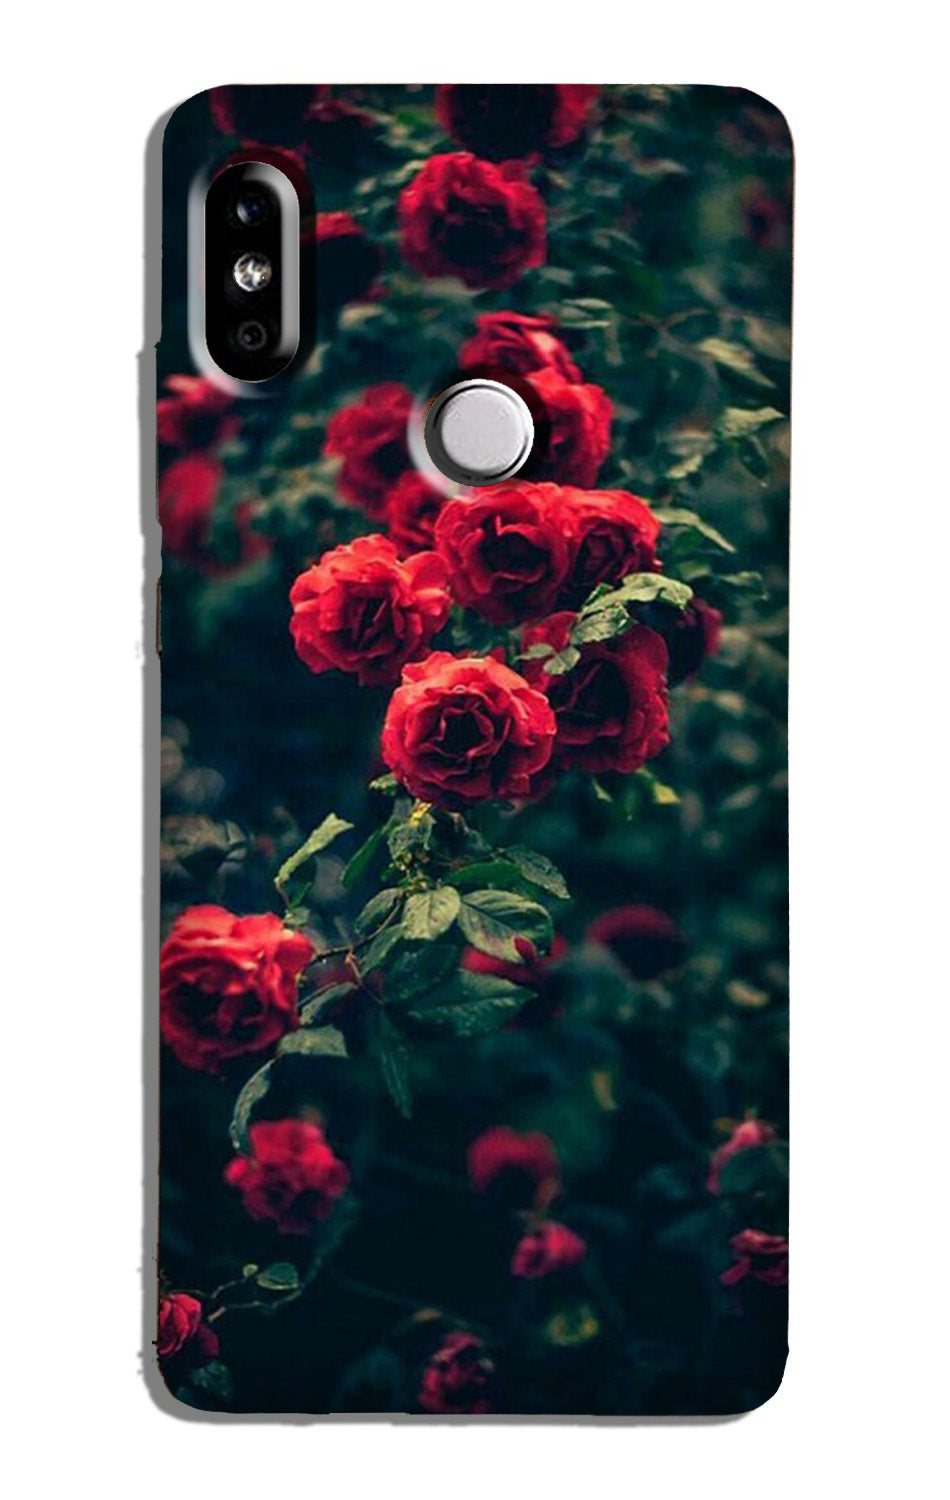 Red Rose Case for Redmi Note 6 Pro